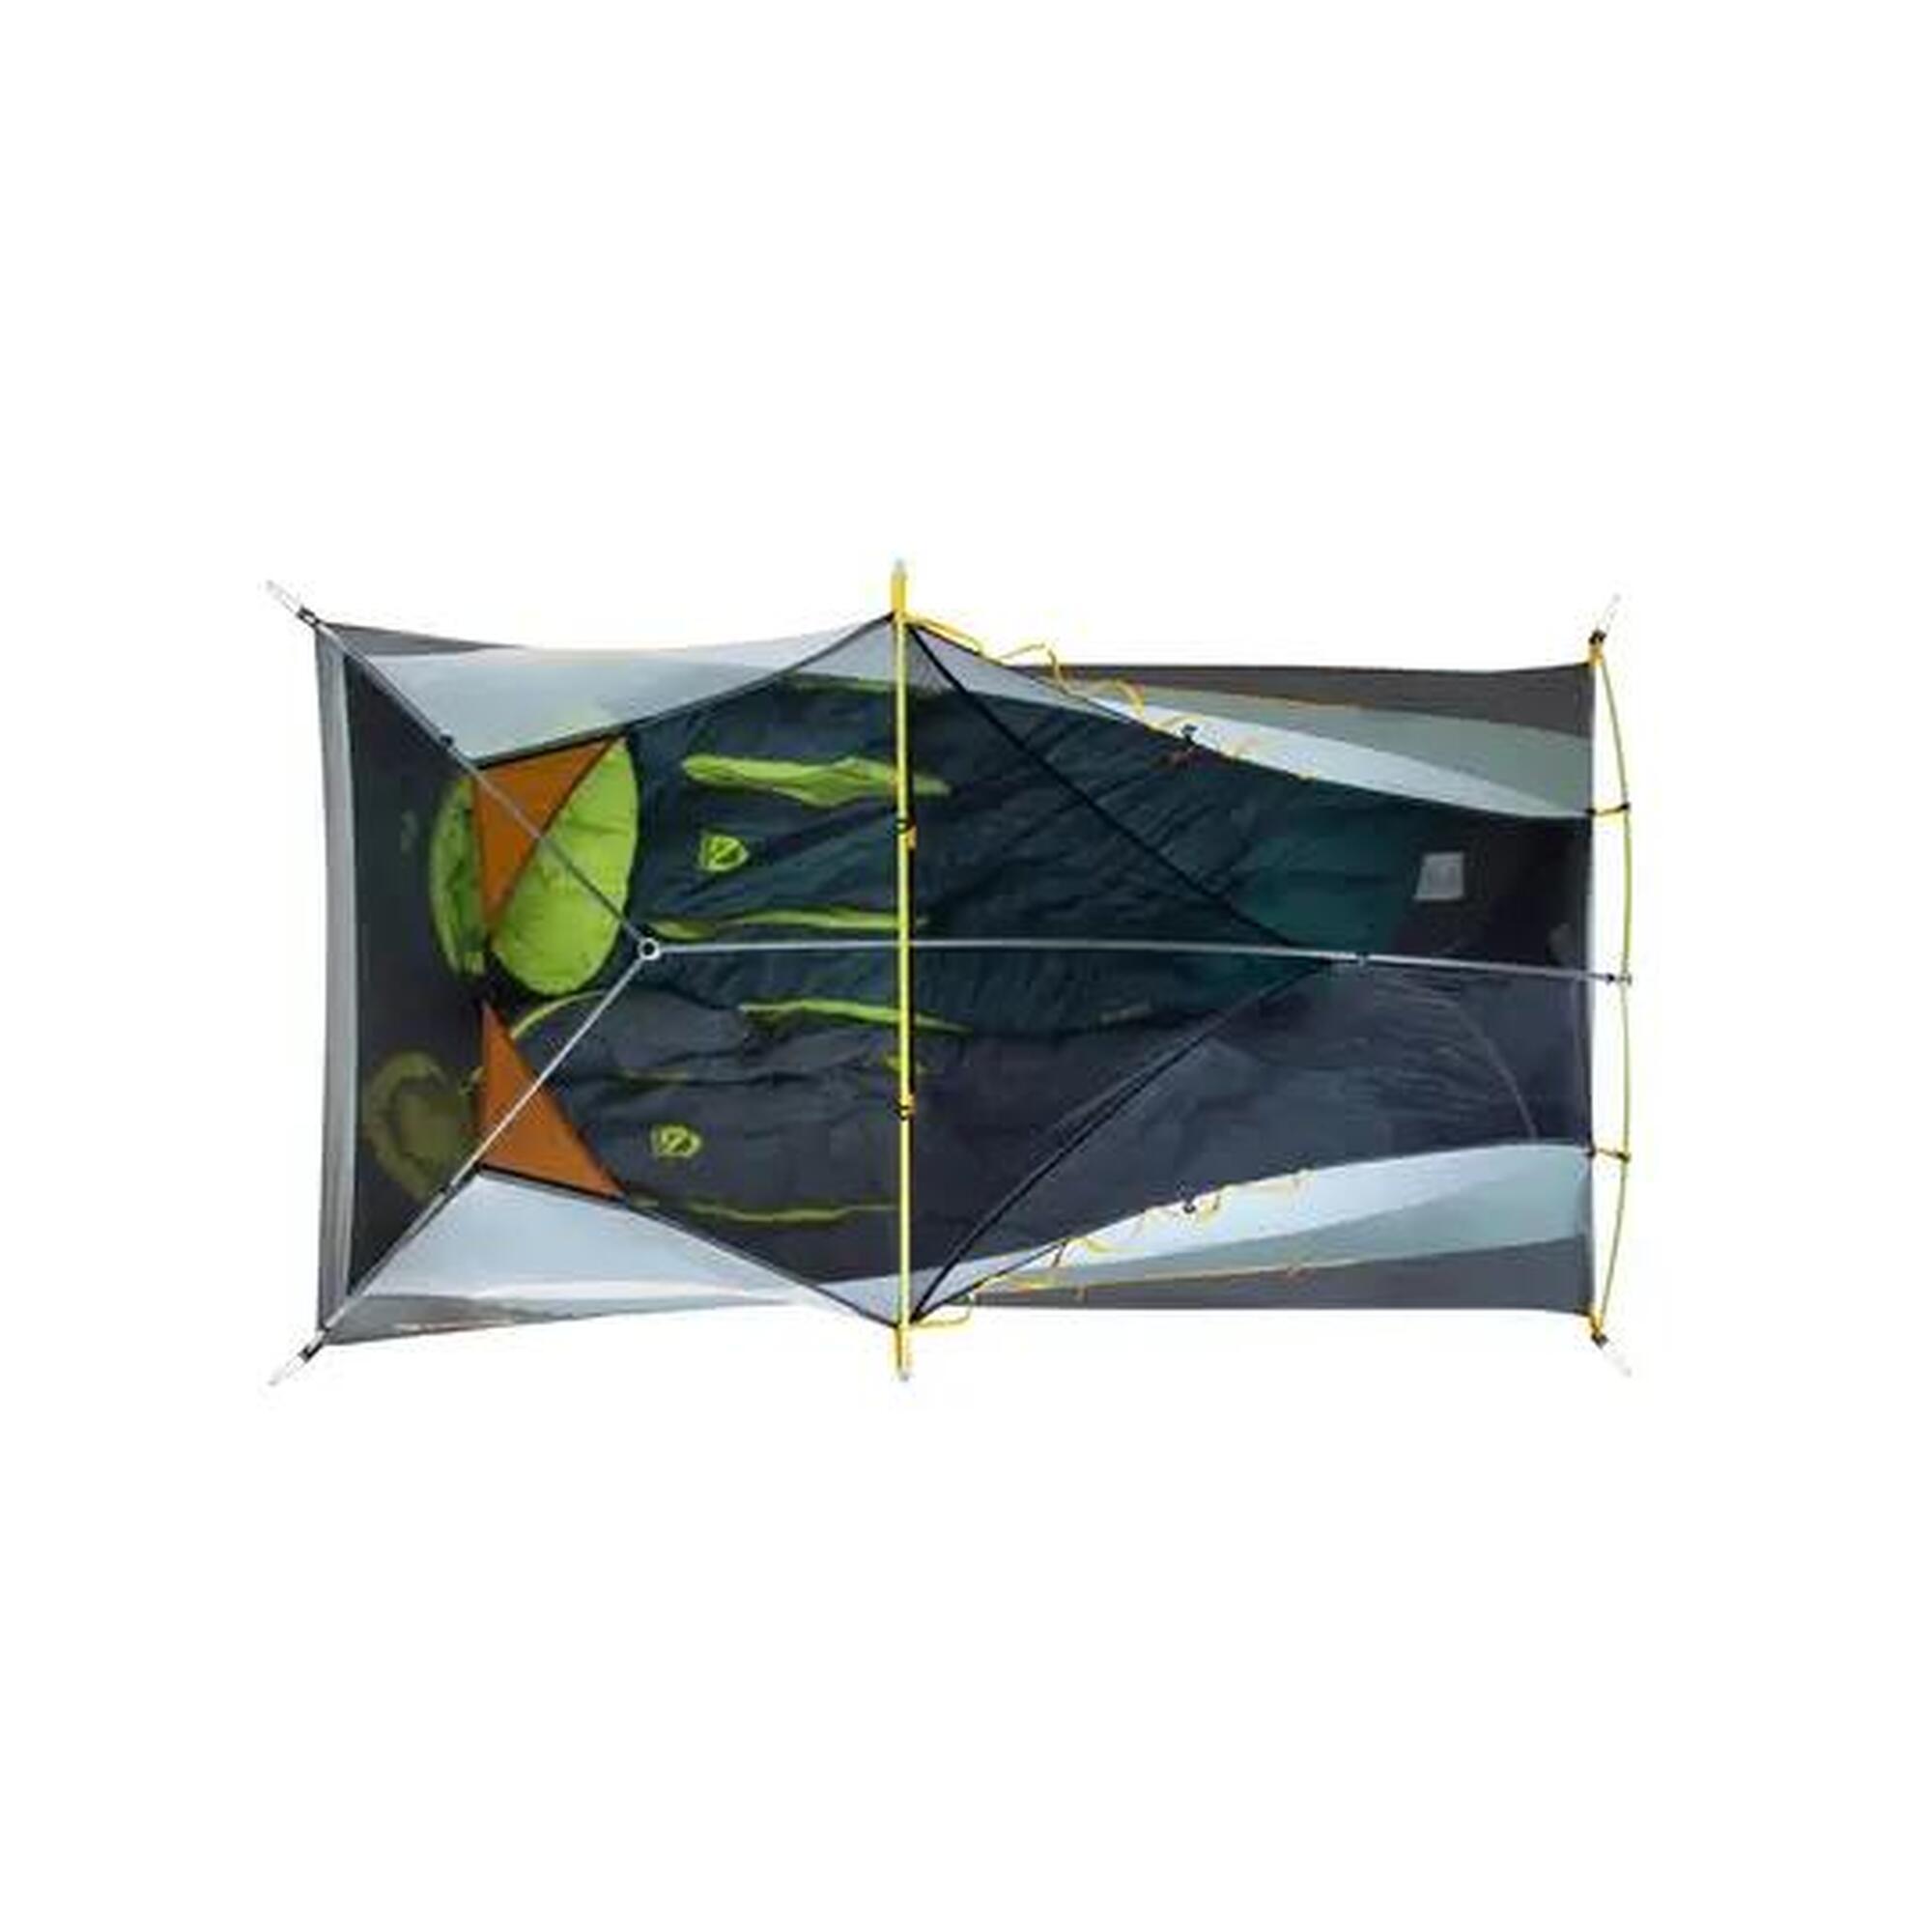 DRAGONFLY OSMO BIKEPACK 2P TENT / Grey